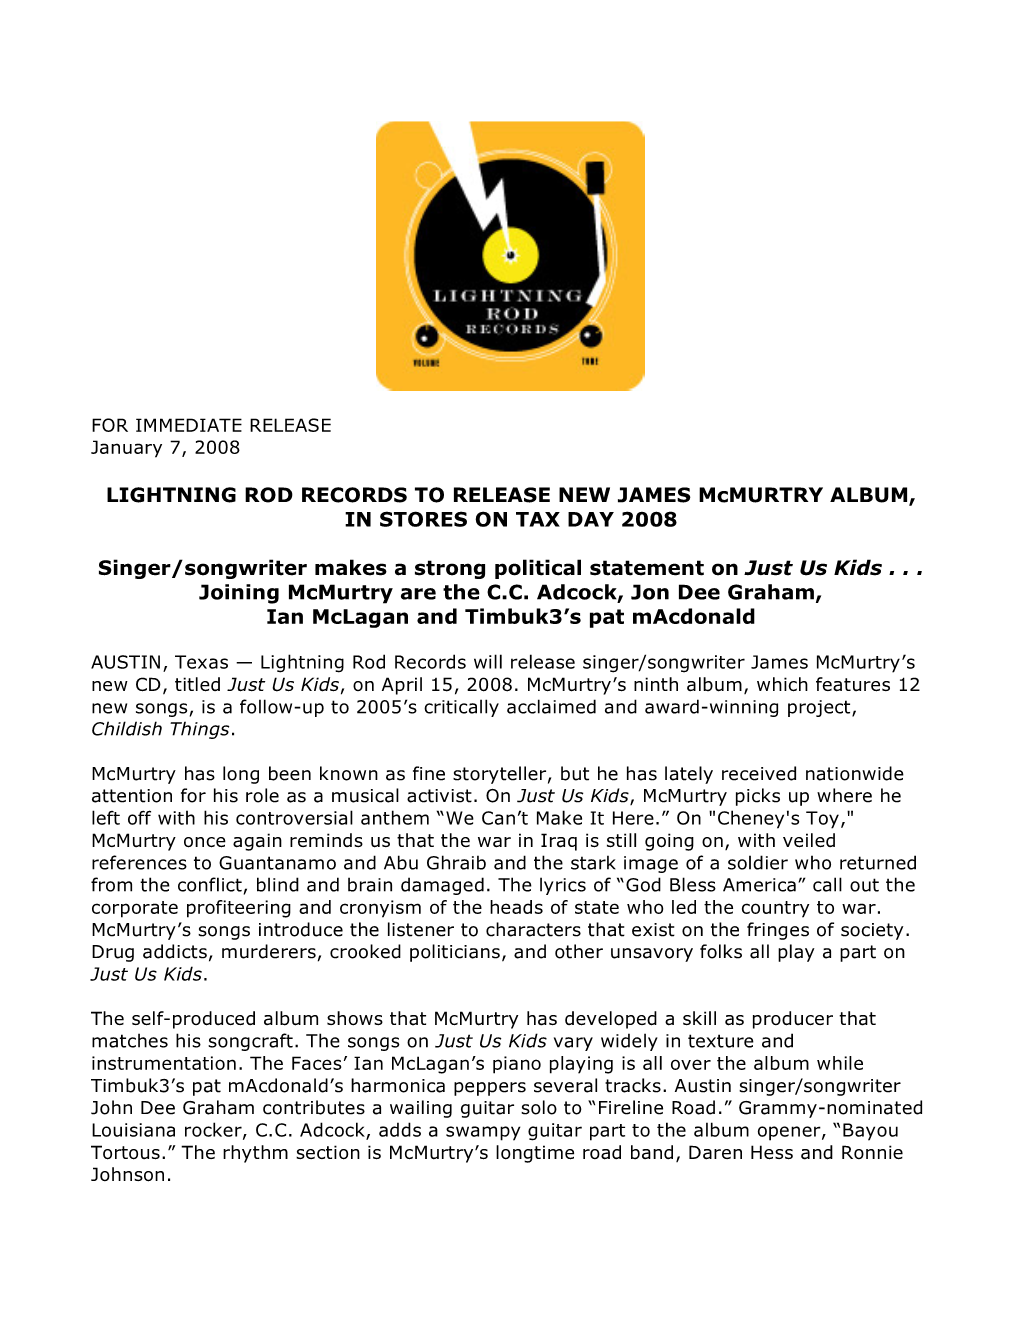 LIGHTNING ROD RECORDS to RELEASE NEW JAMES Mcmurtry ALBUM, in STORES on TAX DAY 2008